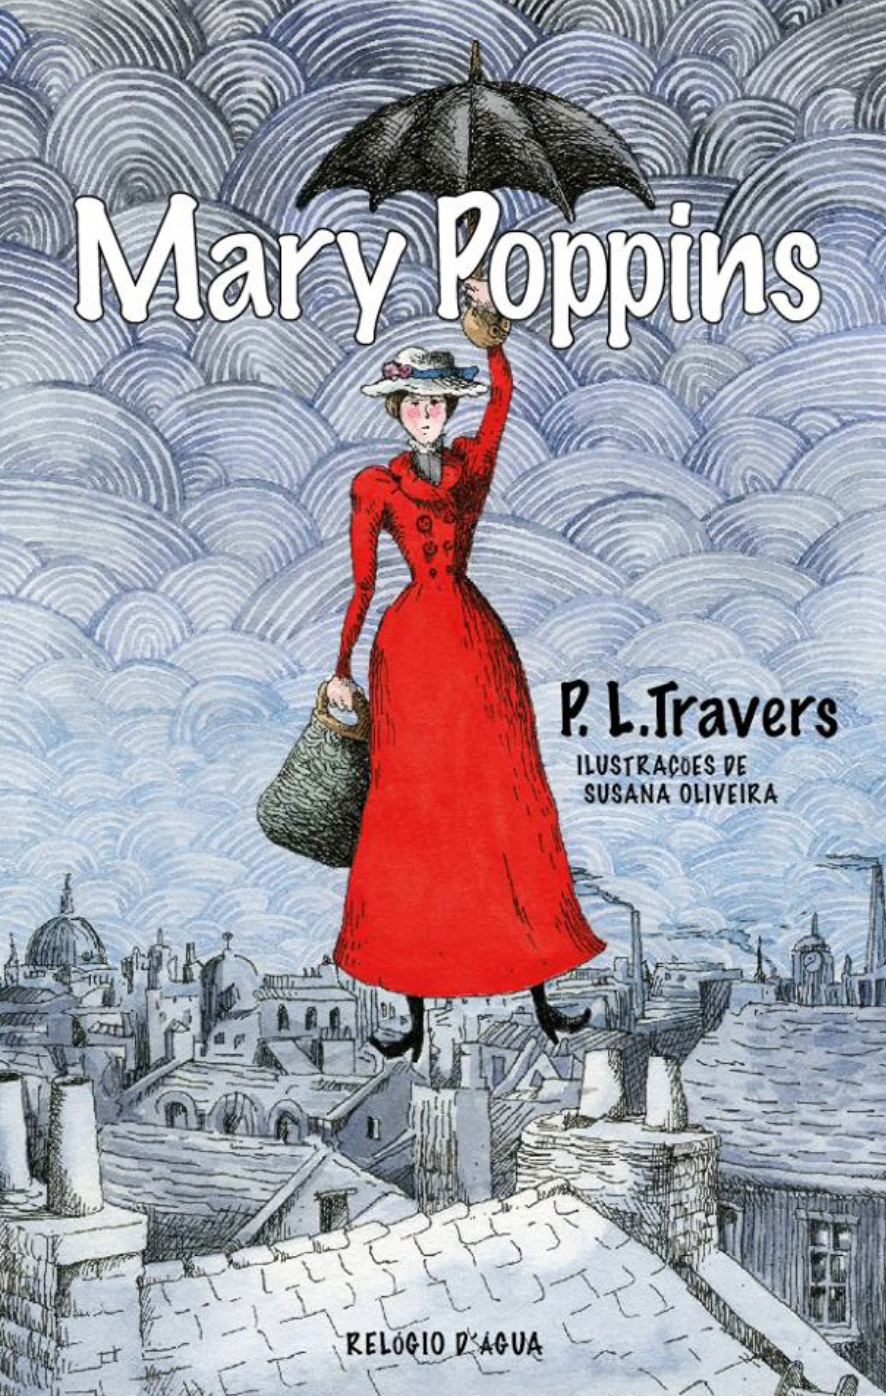 Mary Poppins, by PL Travers